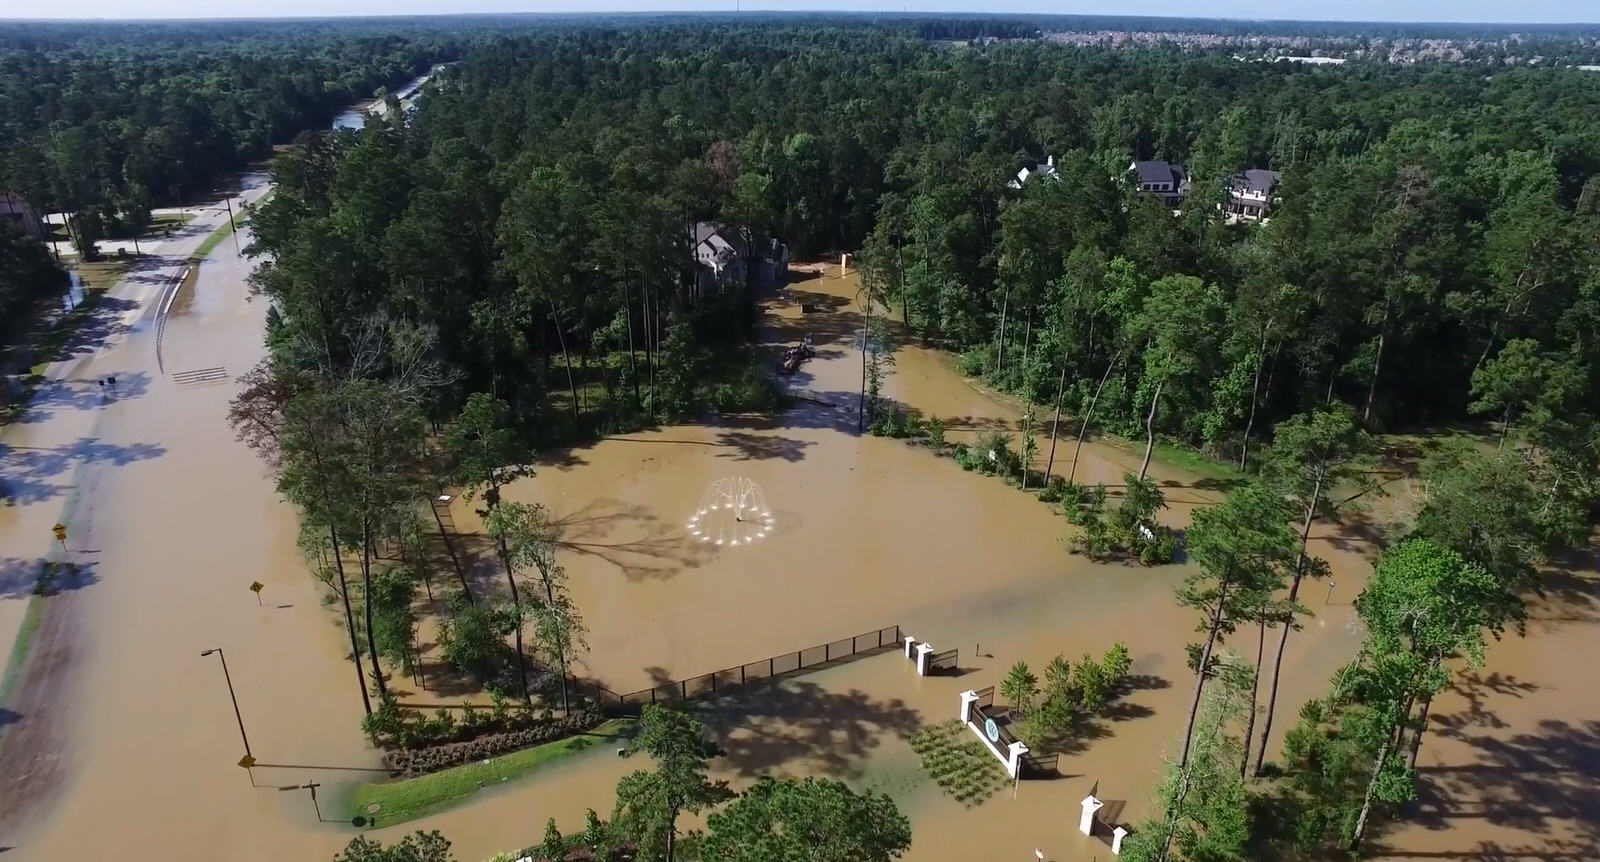 Drone Footage Shows Flooding In The Woodlands Near Houston 8850